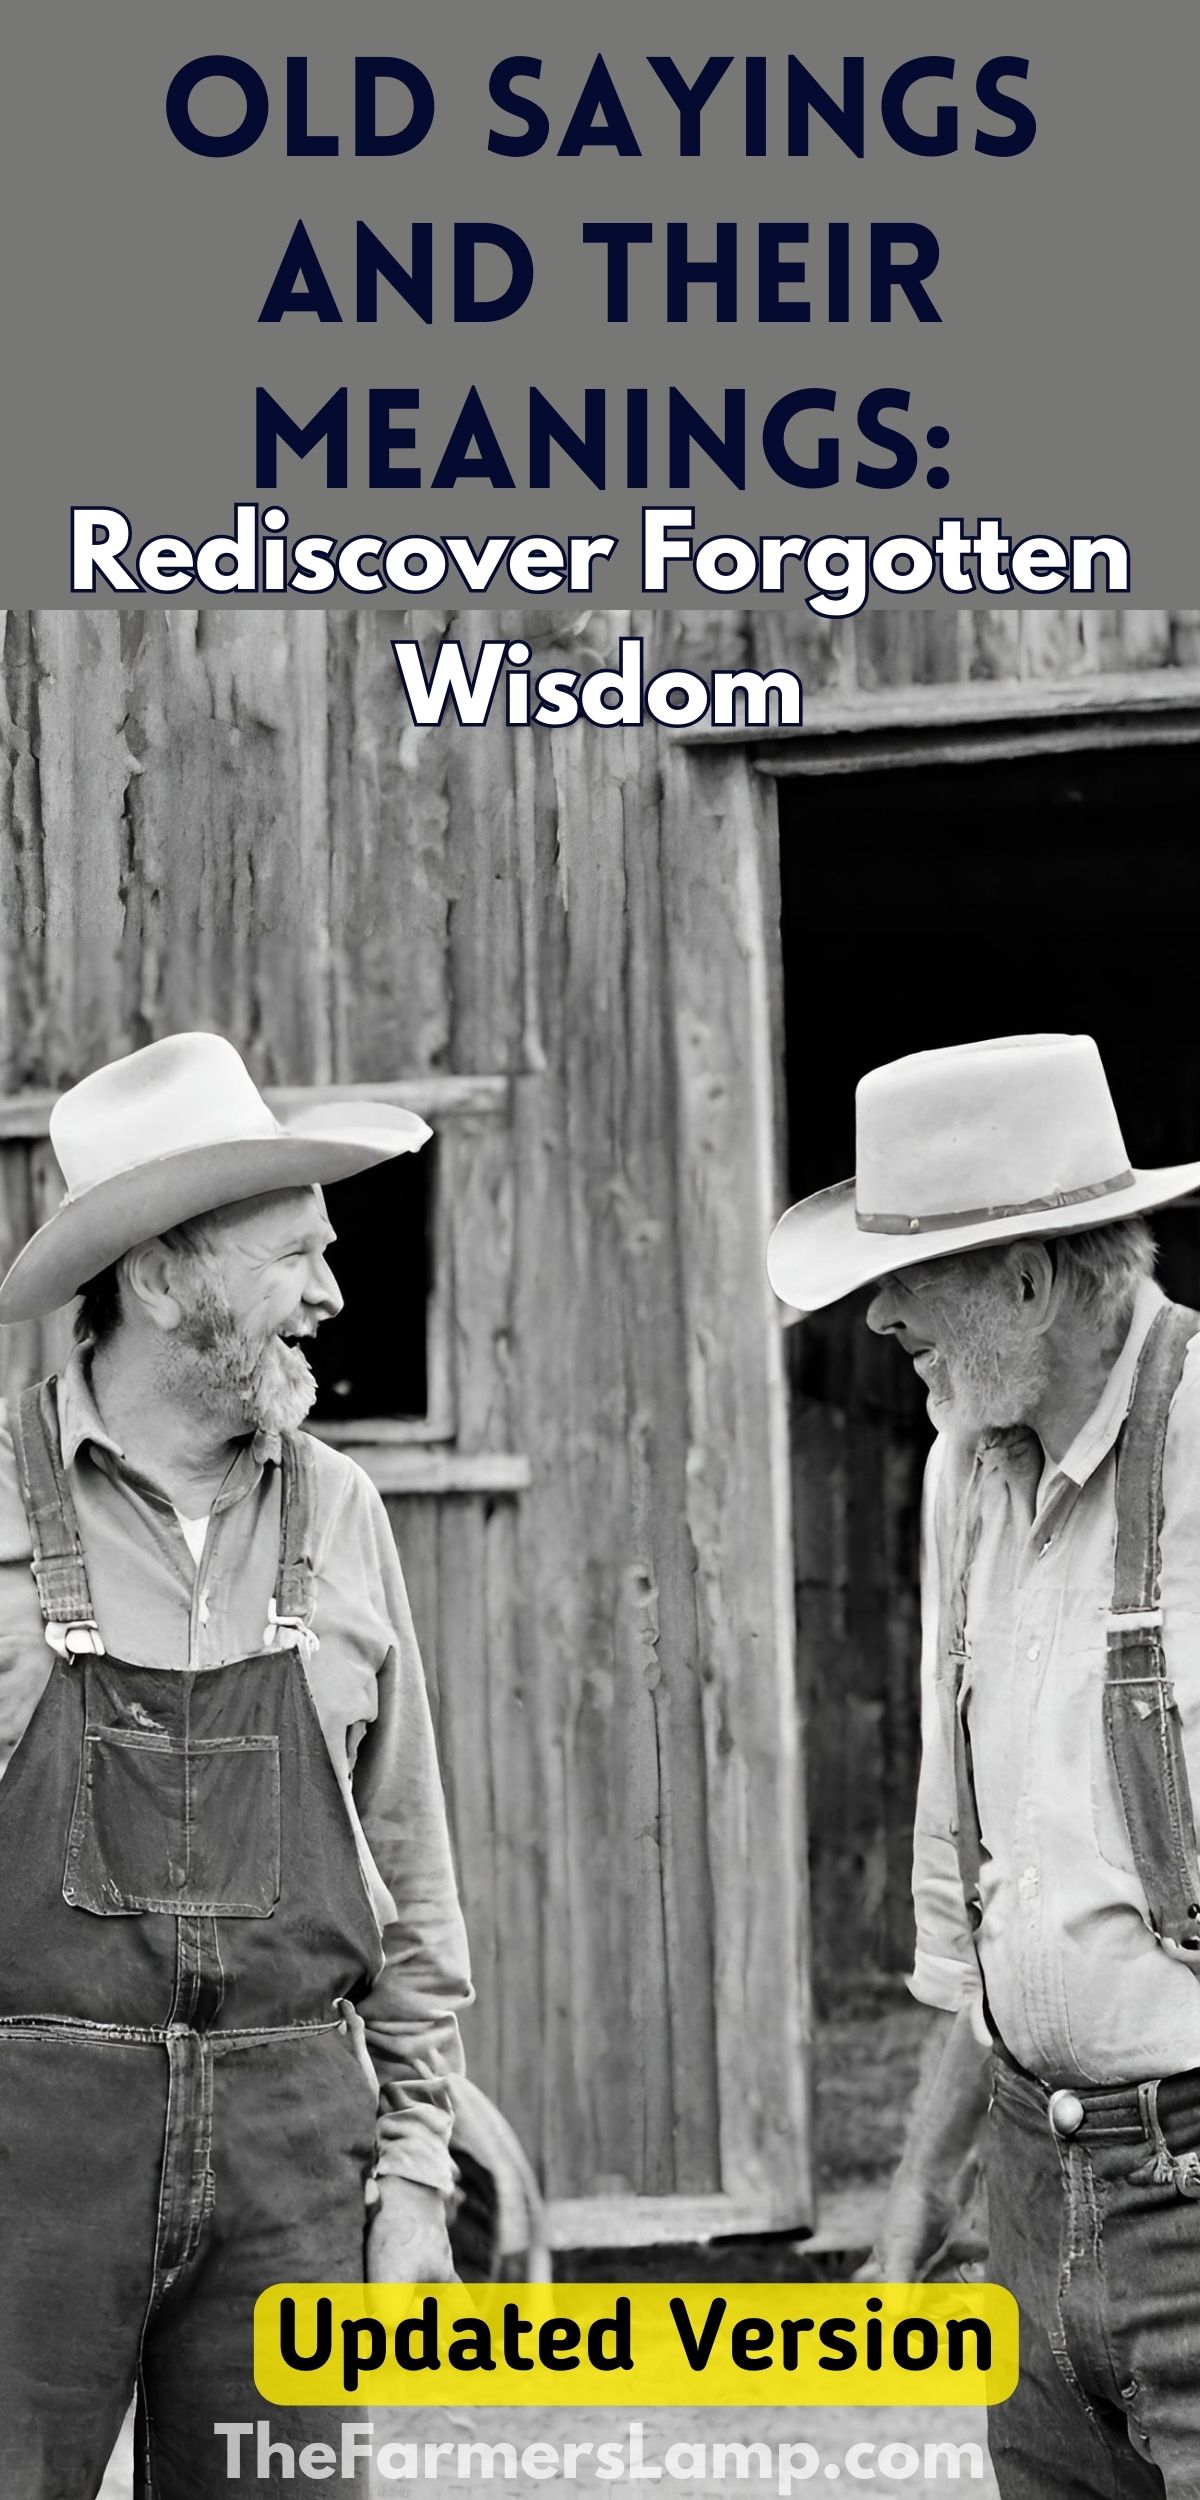 black and white photo of two old farmers laughing in front of a barn as they talk about old sayings there are words written on the picture that read old sayings and their meanings rediscover forgotten wisdom updated version the farmers lamp dot com